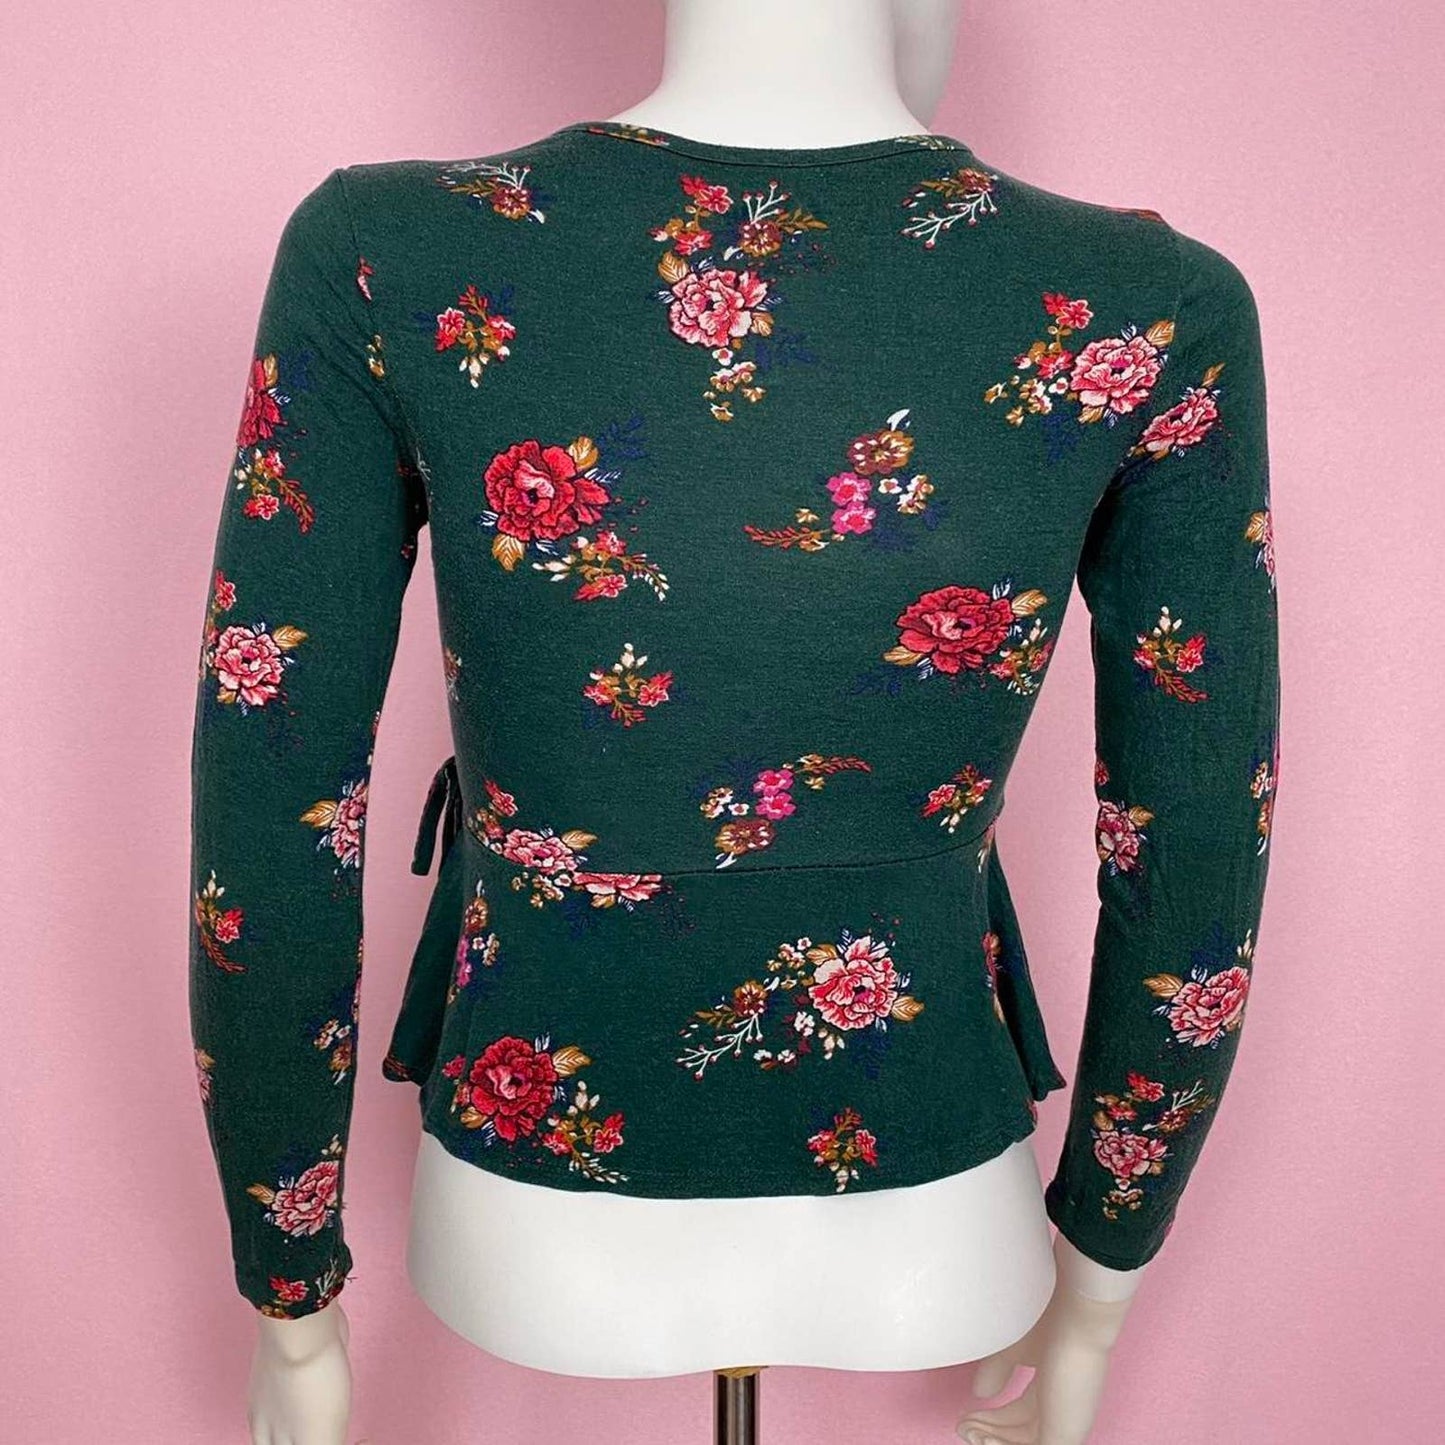 Secondhand Art Class Ruffle Trim Floral Crop Top, Size Small